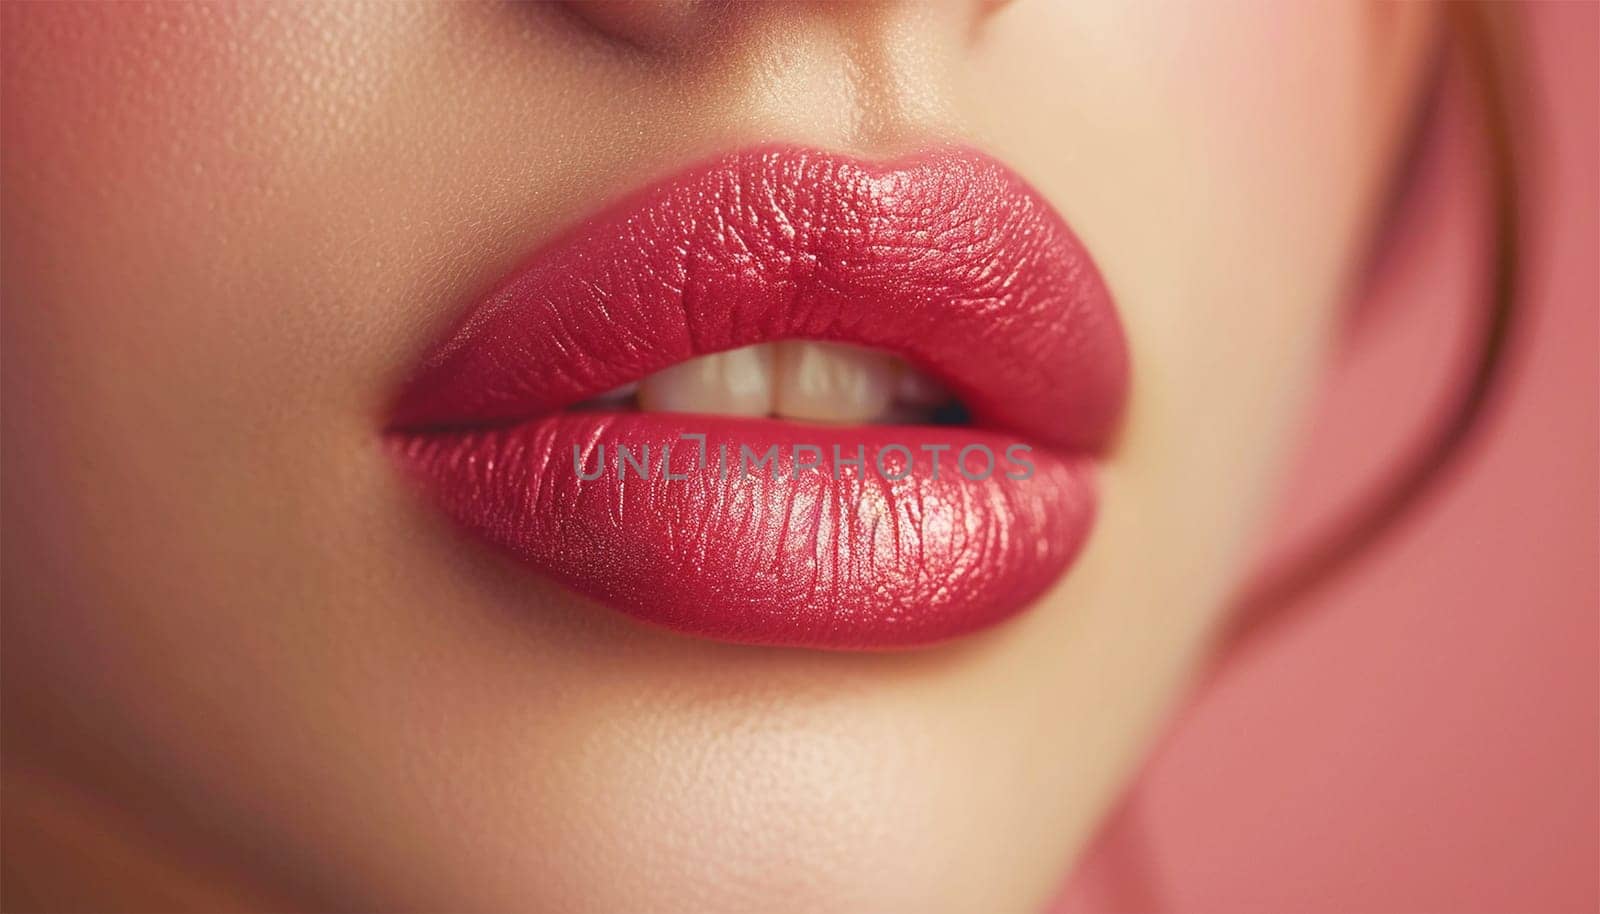 Beautiful lips Close-up. Makeup. Lip matte lipstick. Sexy lips. Part of face, young woman close up. perfect plump lips bodily lipstick. peach color of lipstick on large lips. Perfect makeup Copy space fashion beauty concept by Annebel146